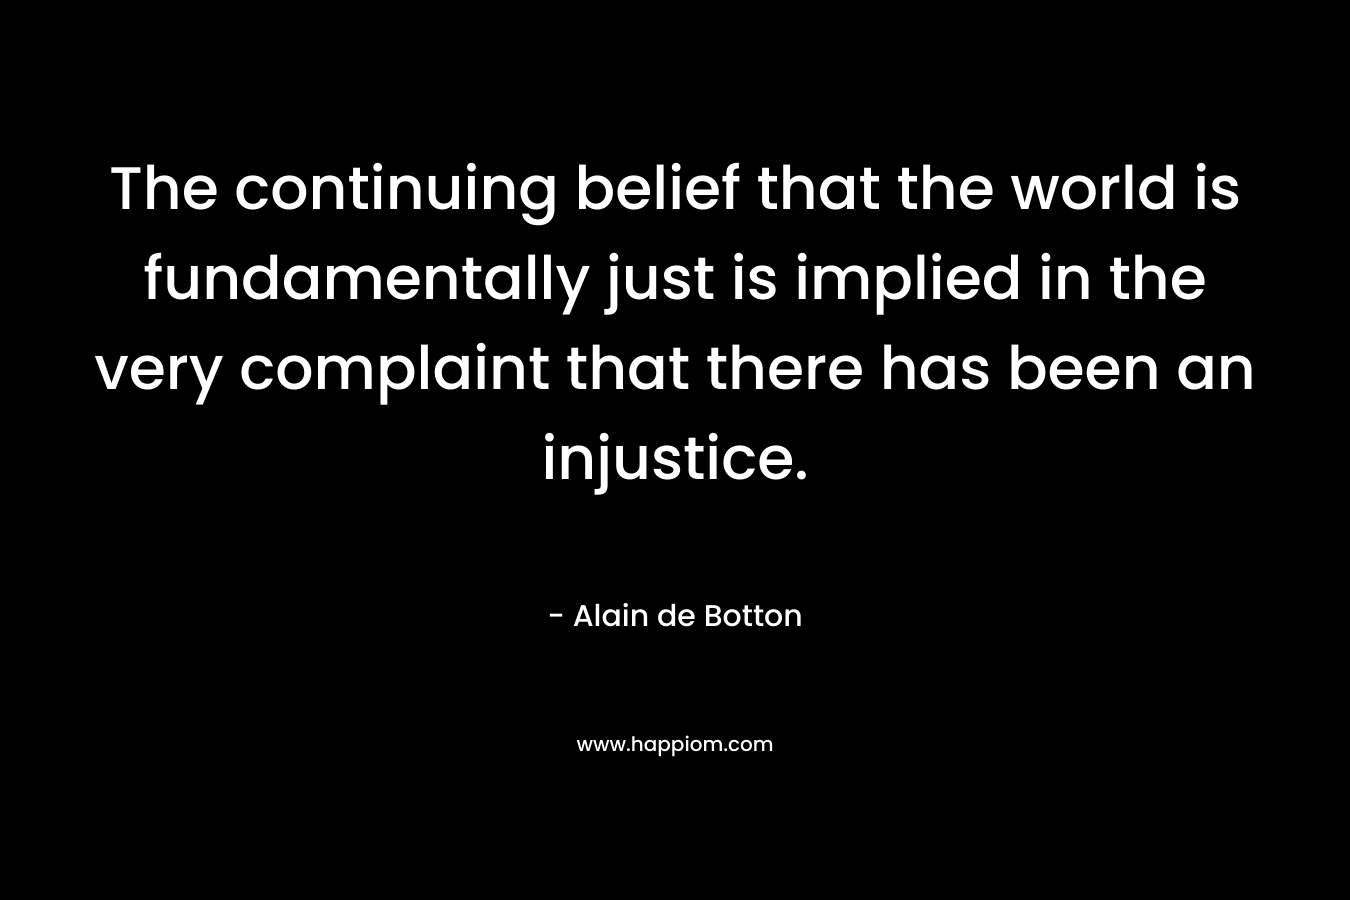 The continuing belief that the world is fundamentally just is implied in the very complaint that there has been an injustice.